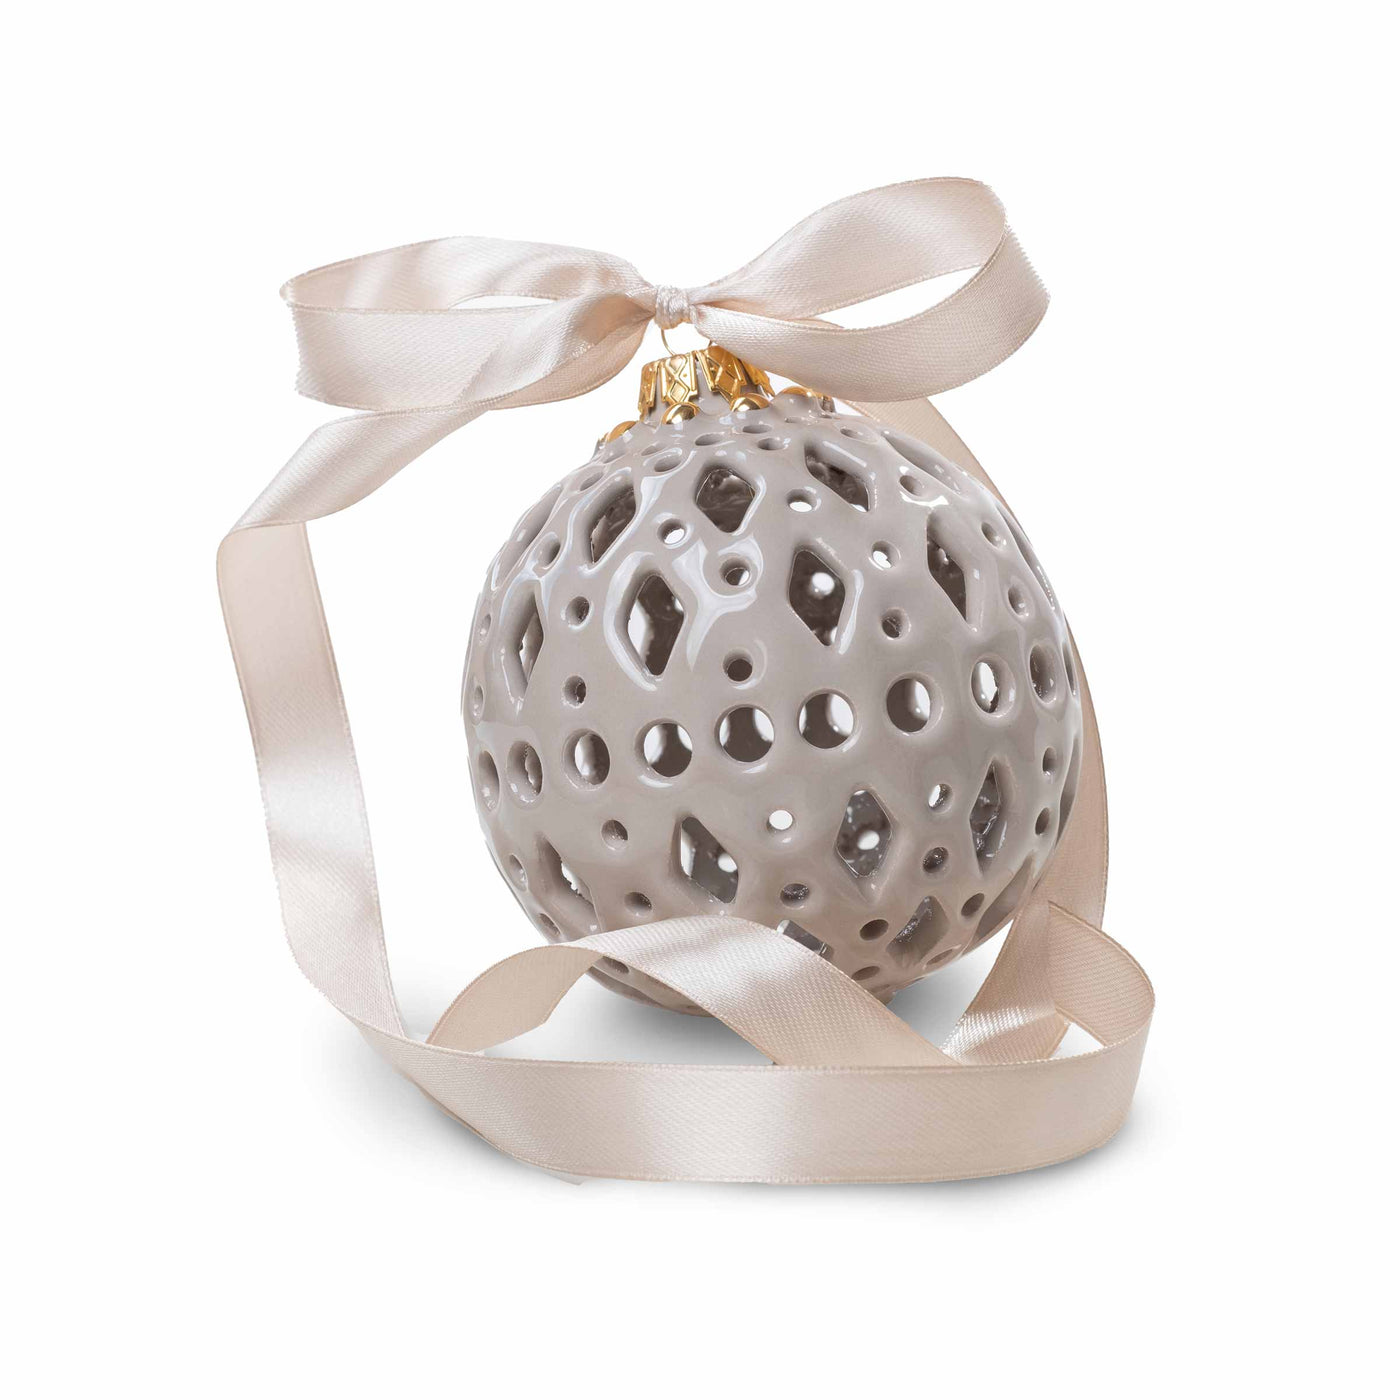 Ceramic Openwork Christmas Balls BAUBLES Set of 4 by E-Pottery 04